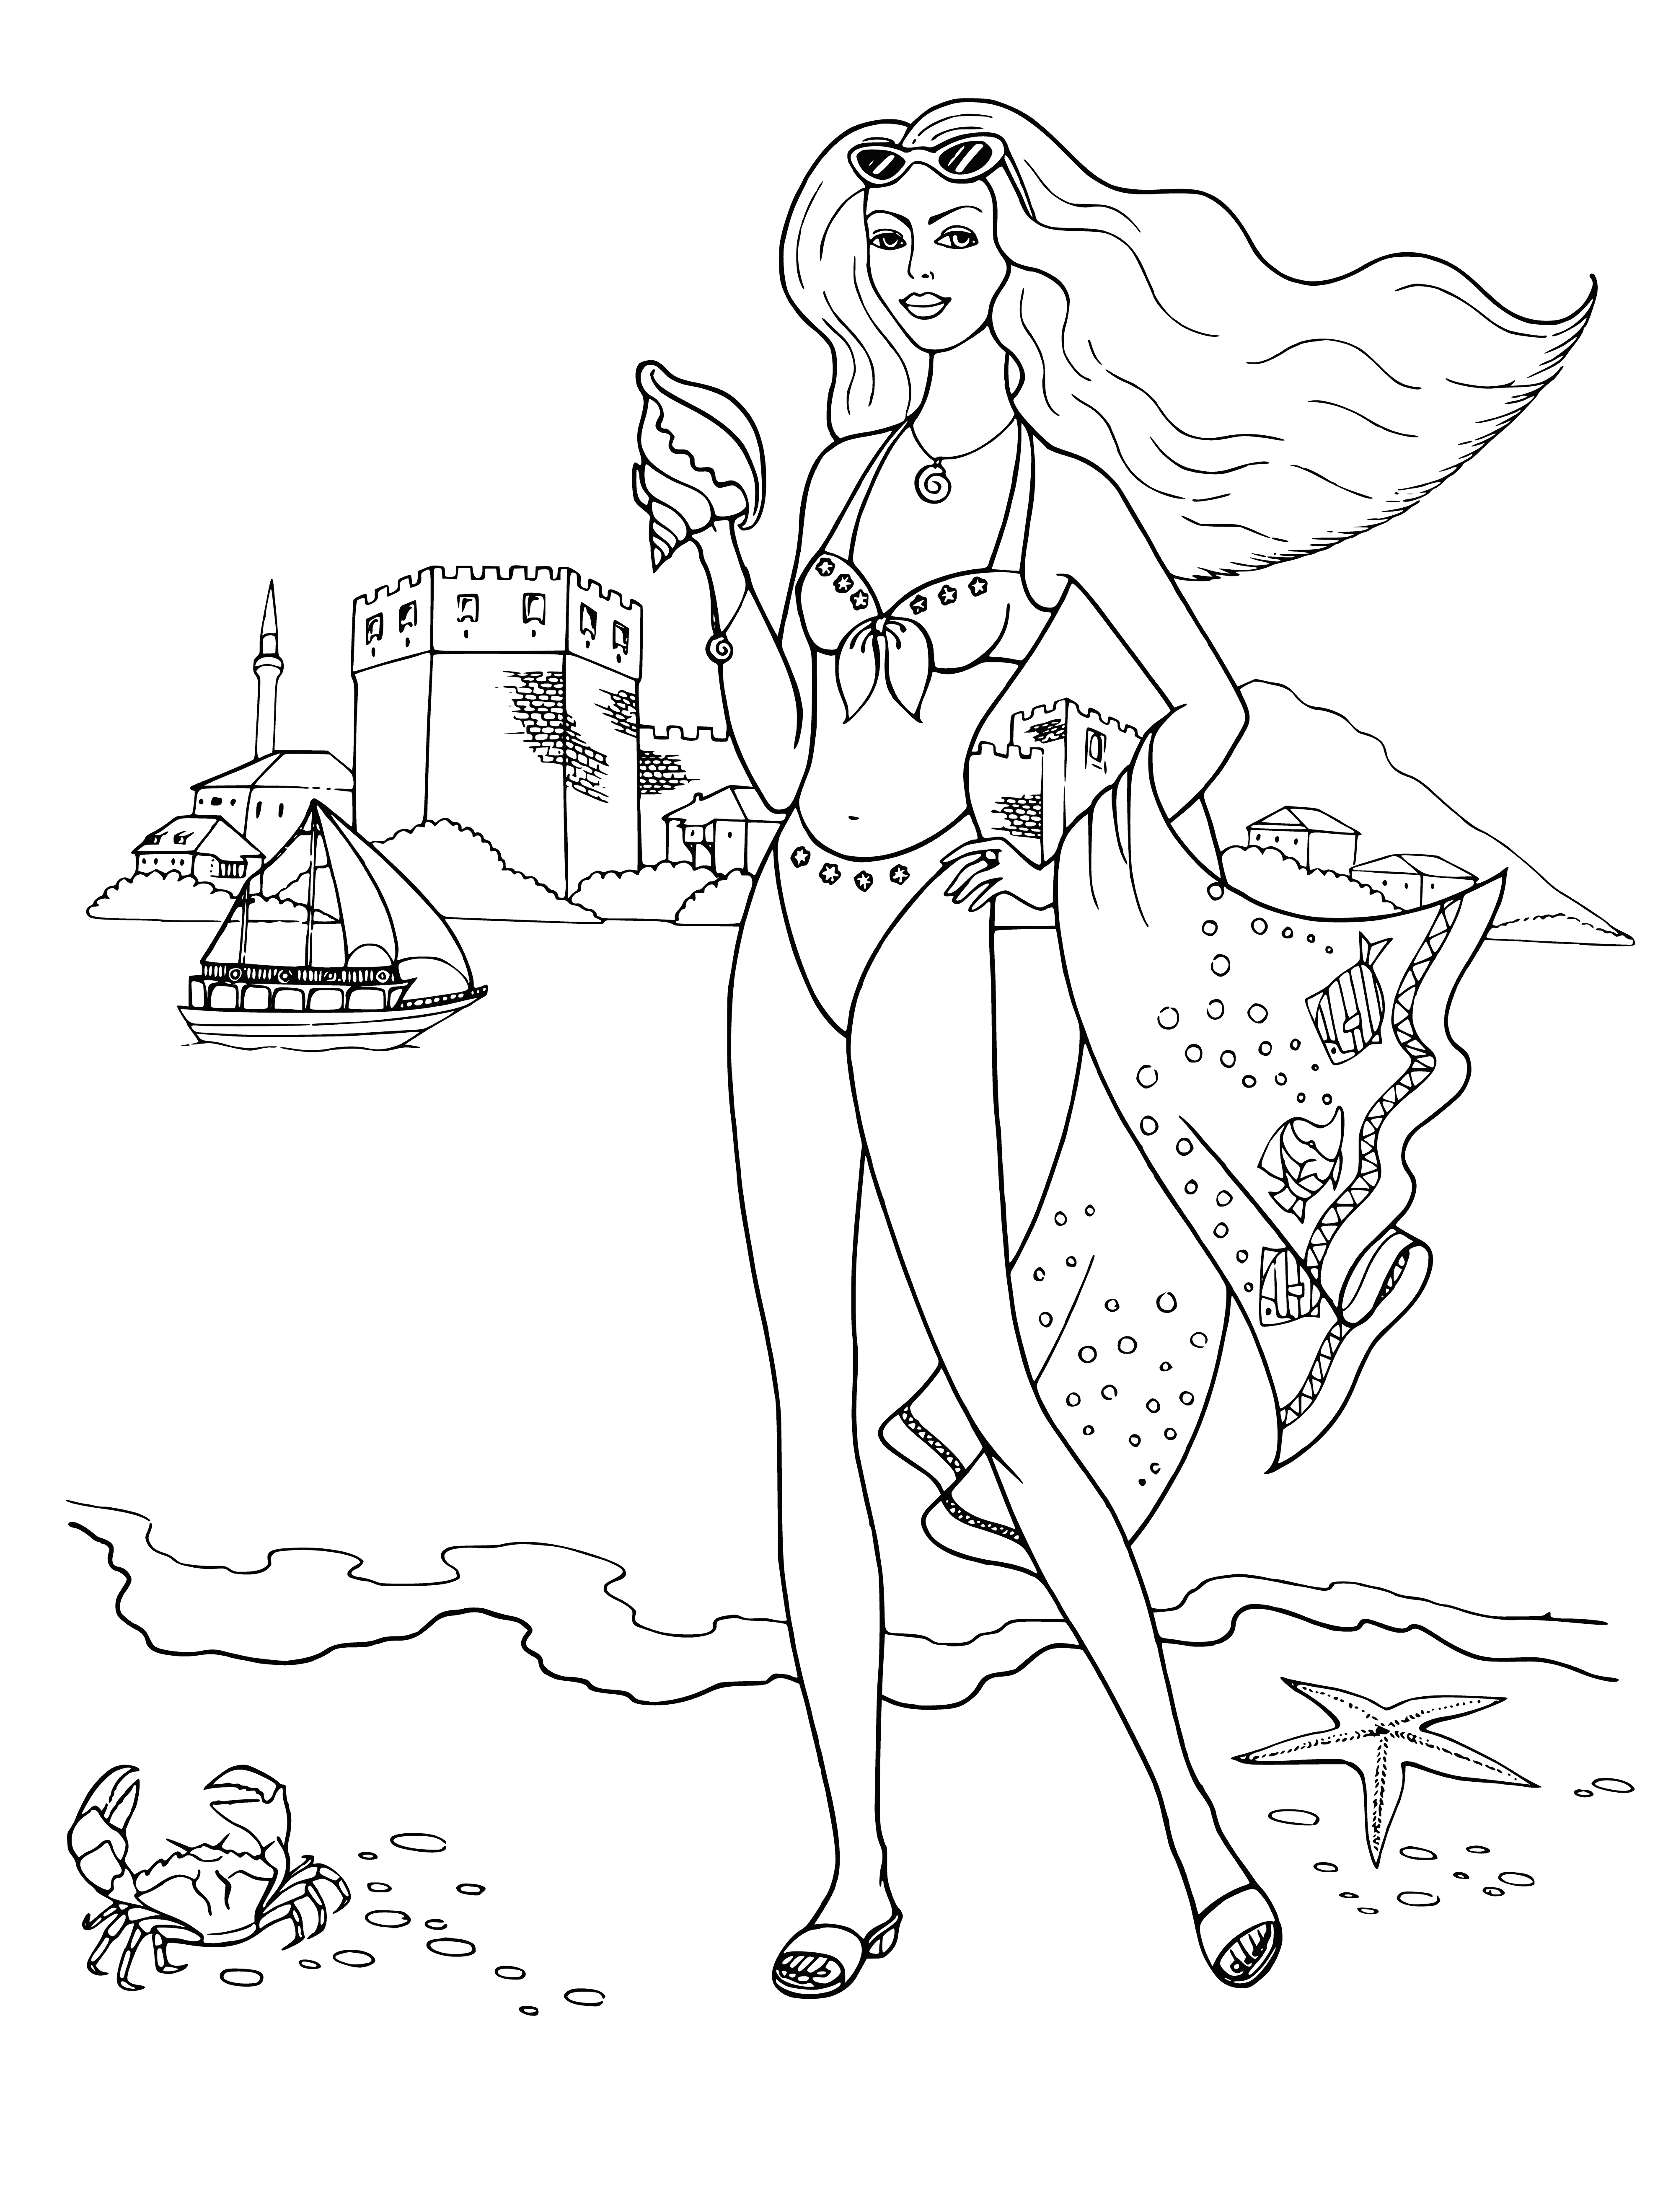 Girl on the beach coloring page